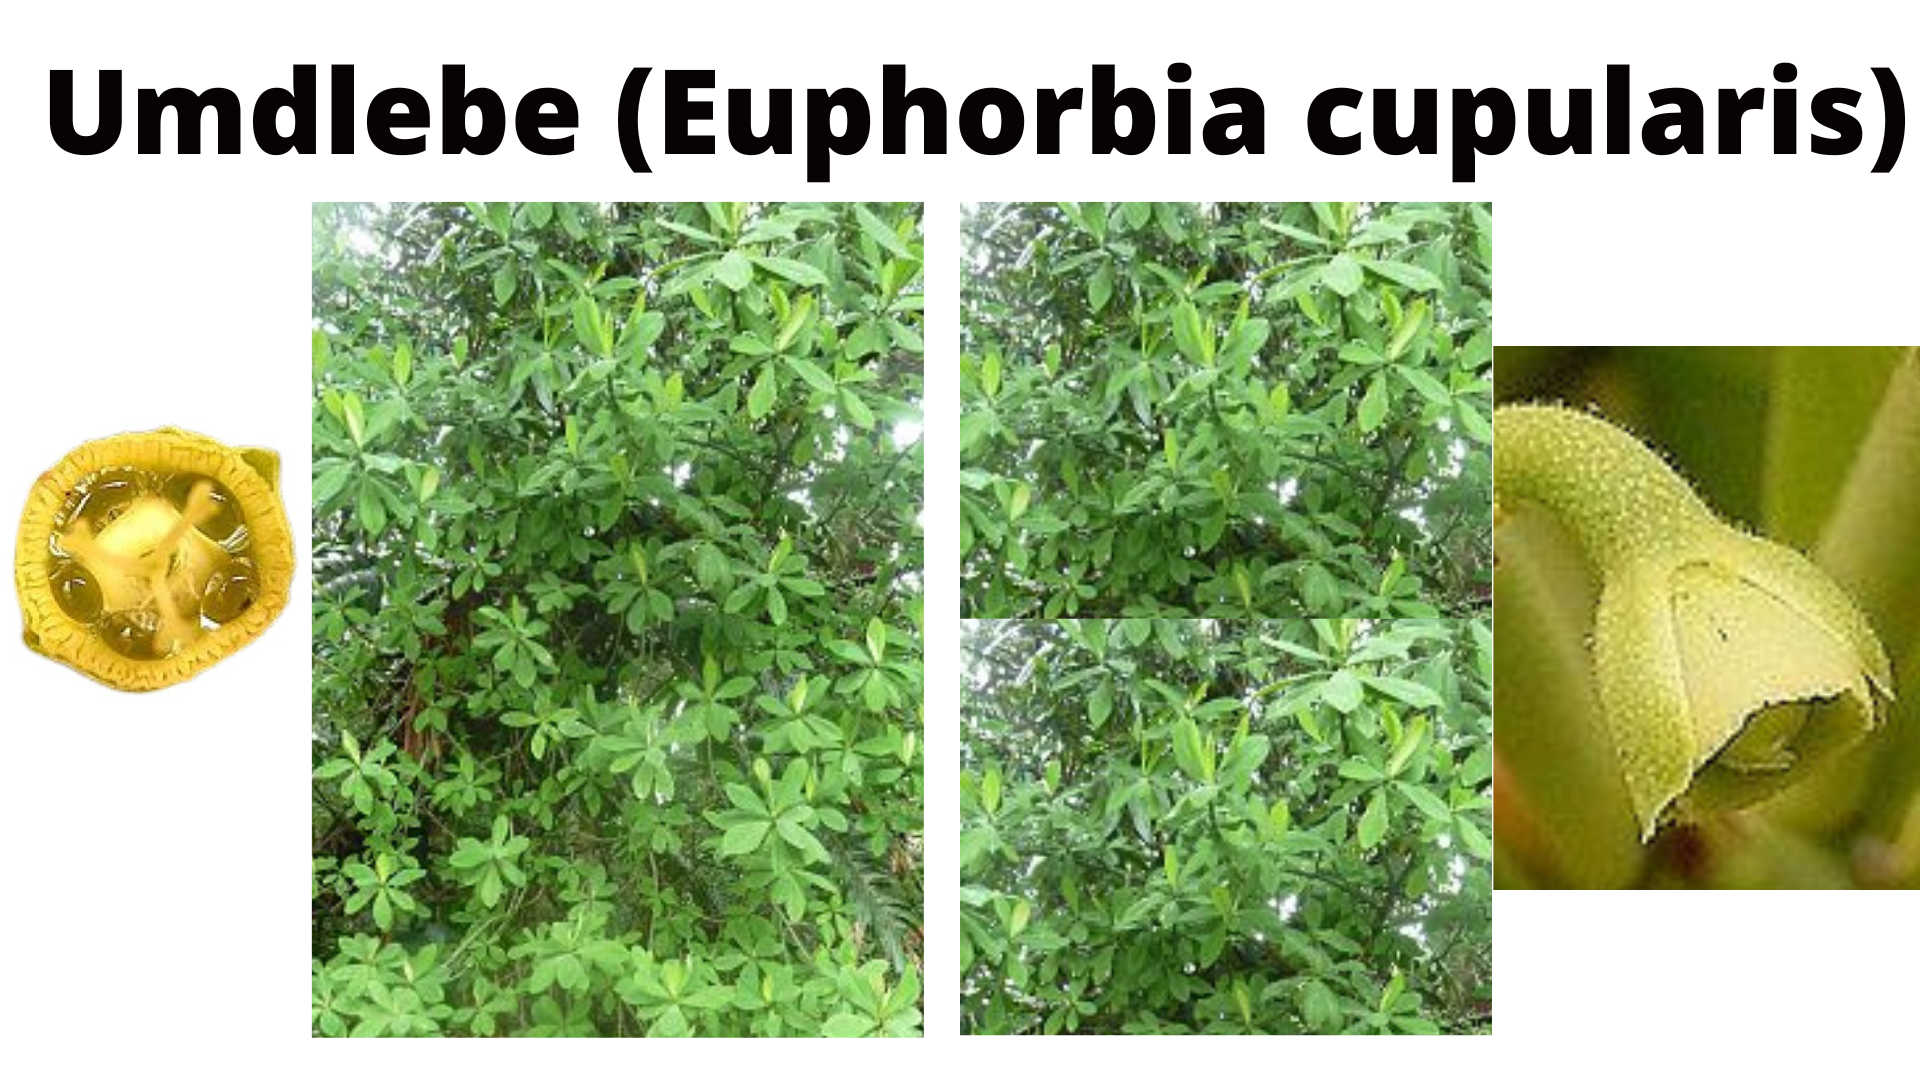 You are currently viewing Euphorbia cupularis (Umdlebe)